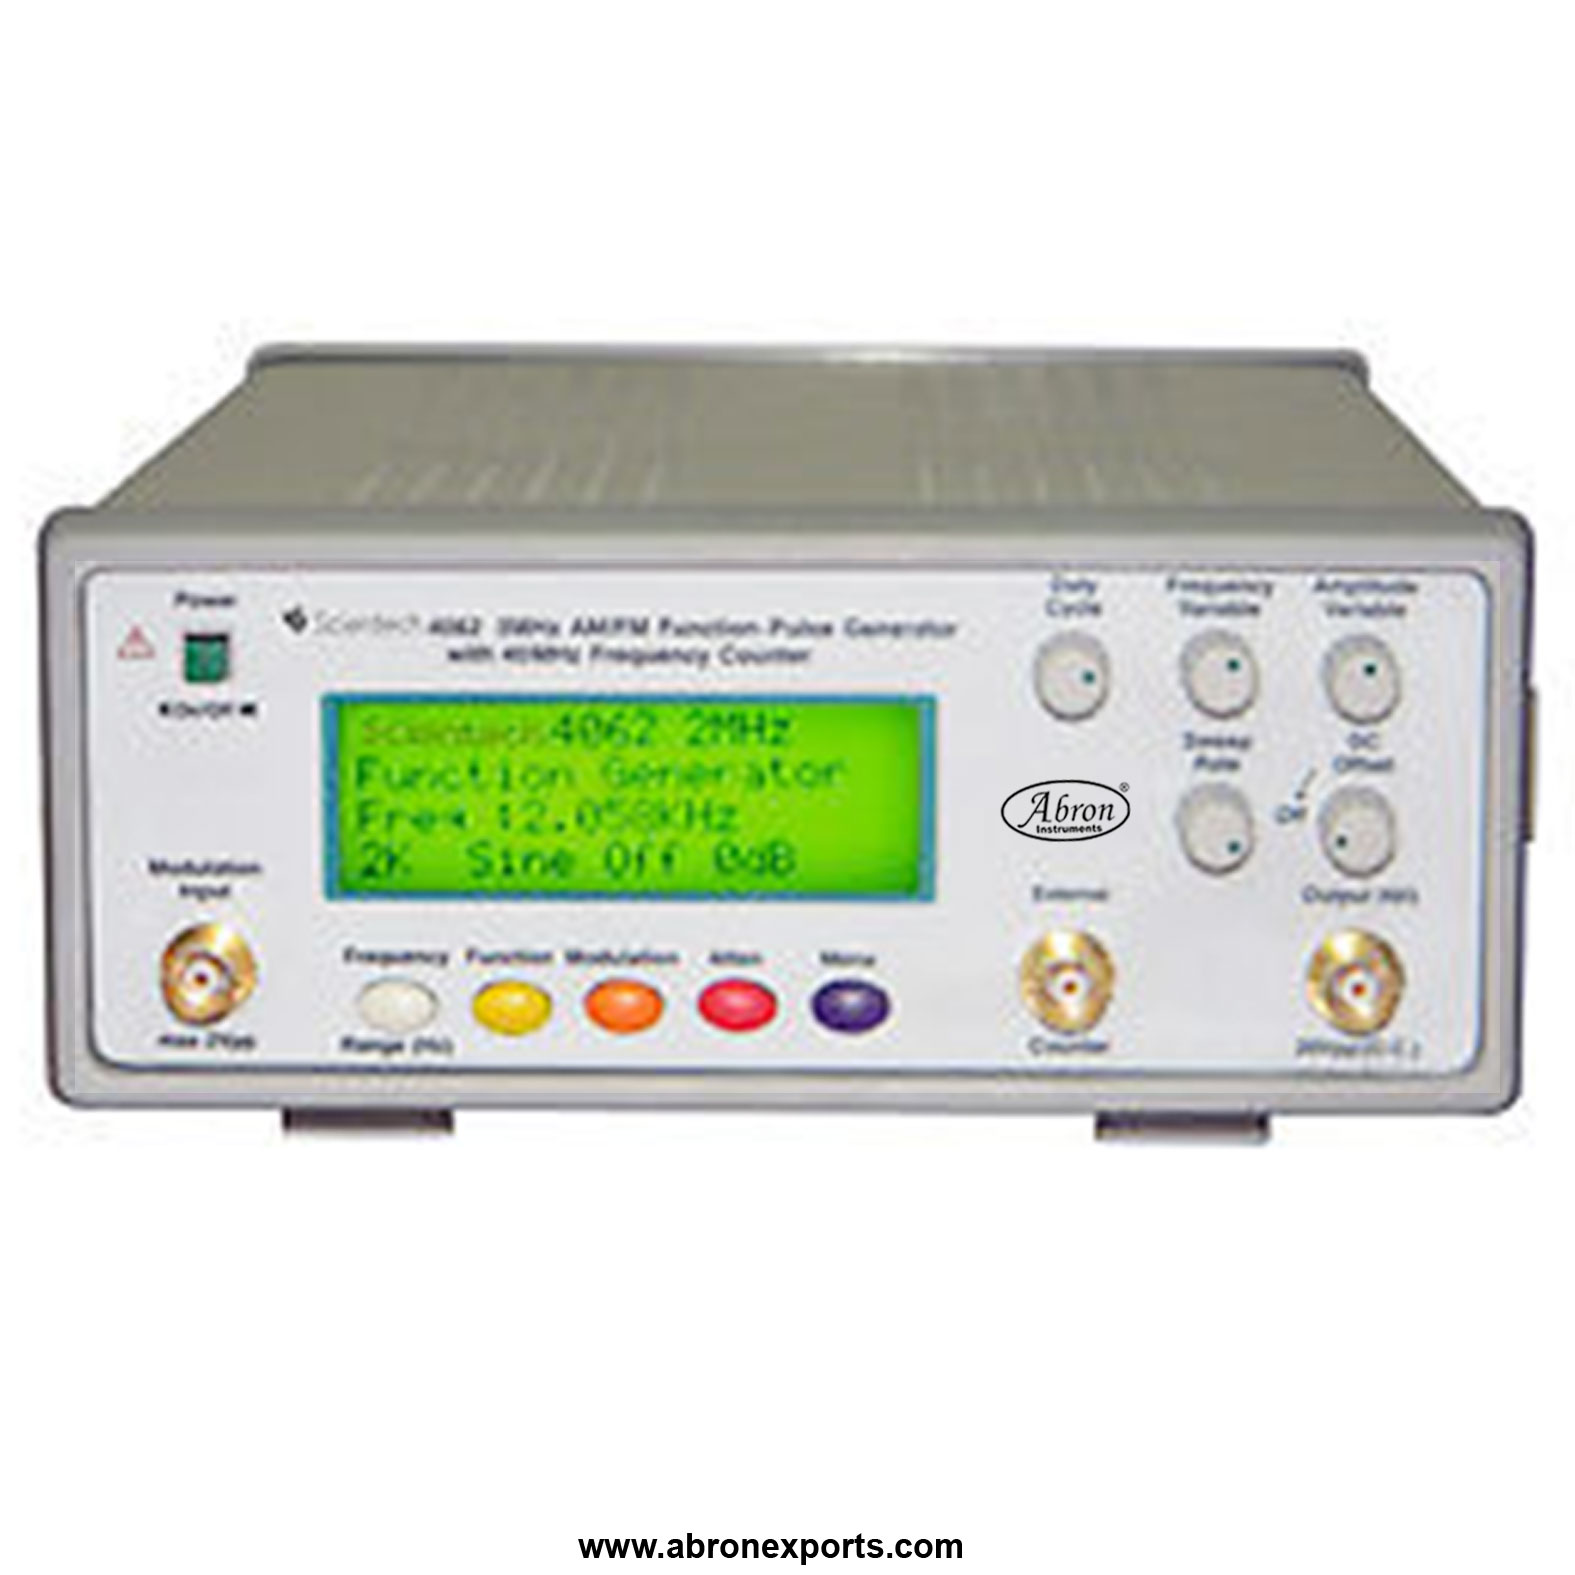 Pulse Generator Counter 0.3 to 3MHz Digital Sine, Square, Triangle, Ramp, Pulse, DC, AM  FM Modulation, PWM, PAM internal sweep 	Frequency counter 40MHz Abron AE-1264D	